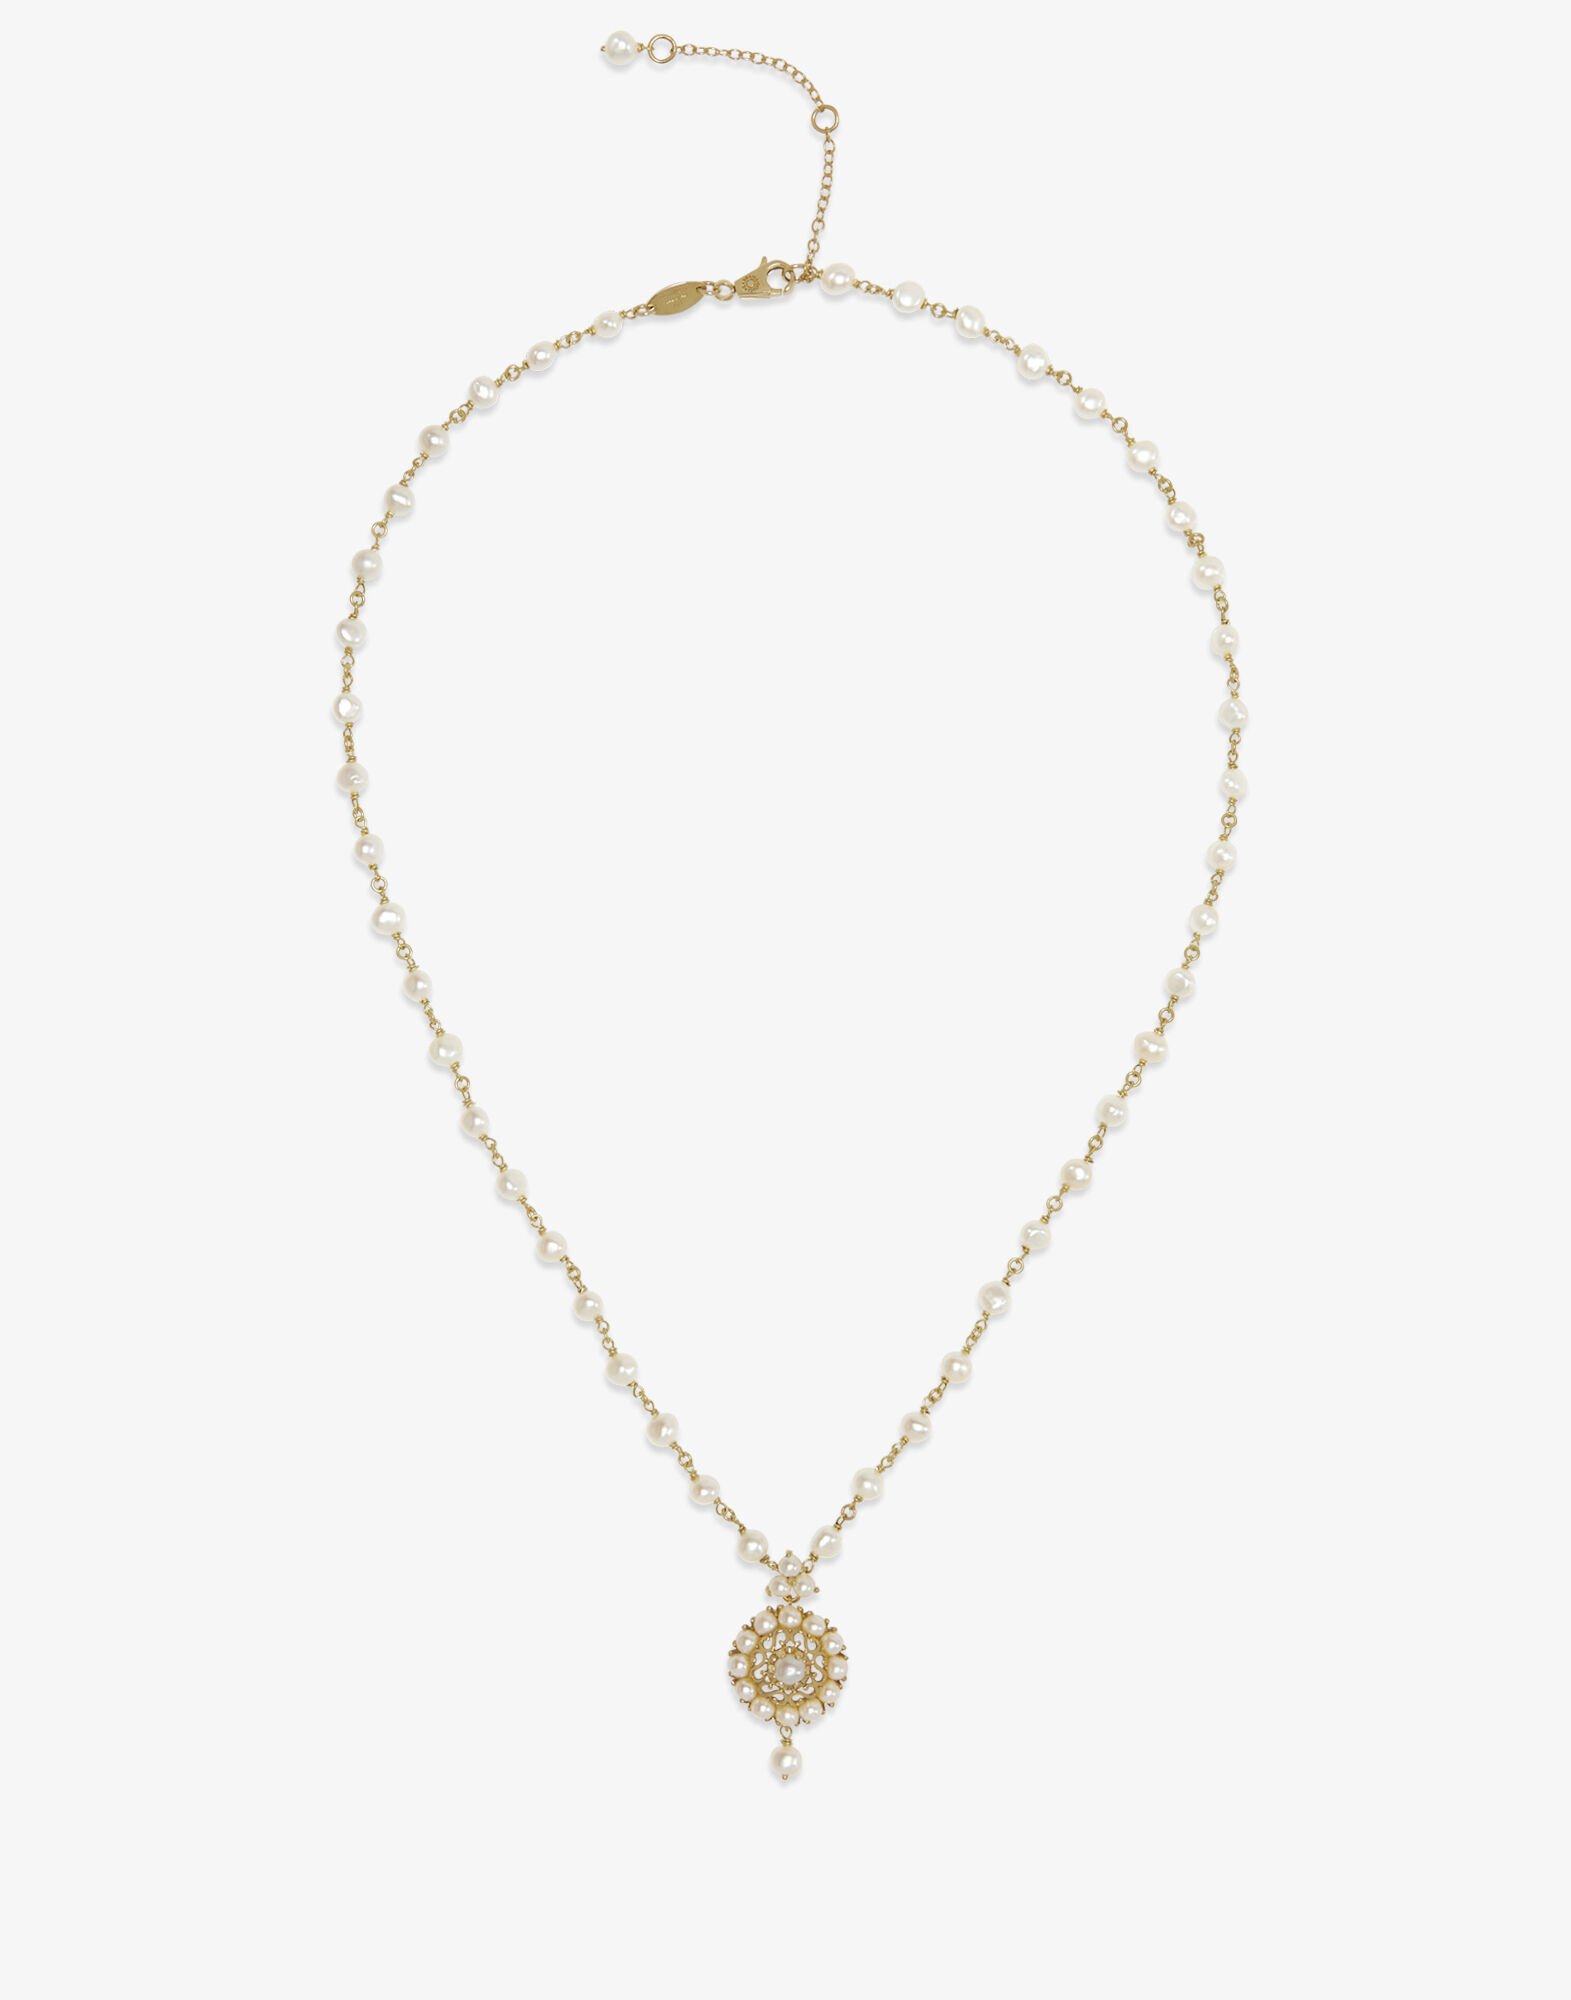 Dolce & Gabbana Romance necklace in yellow gold with pearls Gold WADC2GW0001